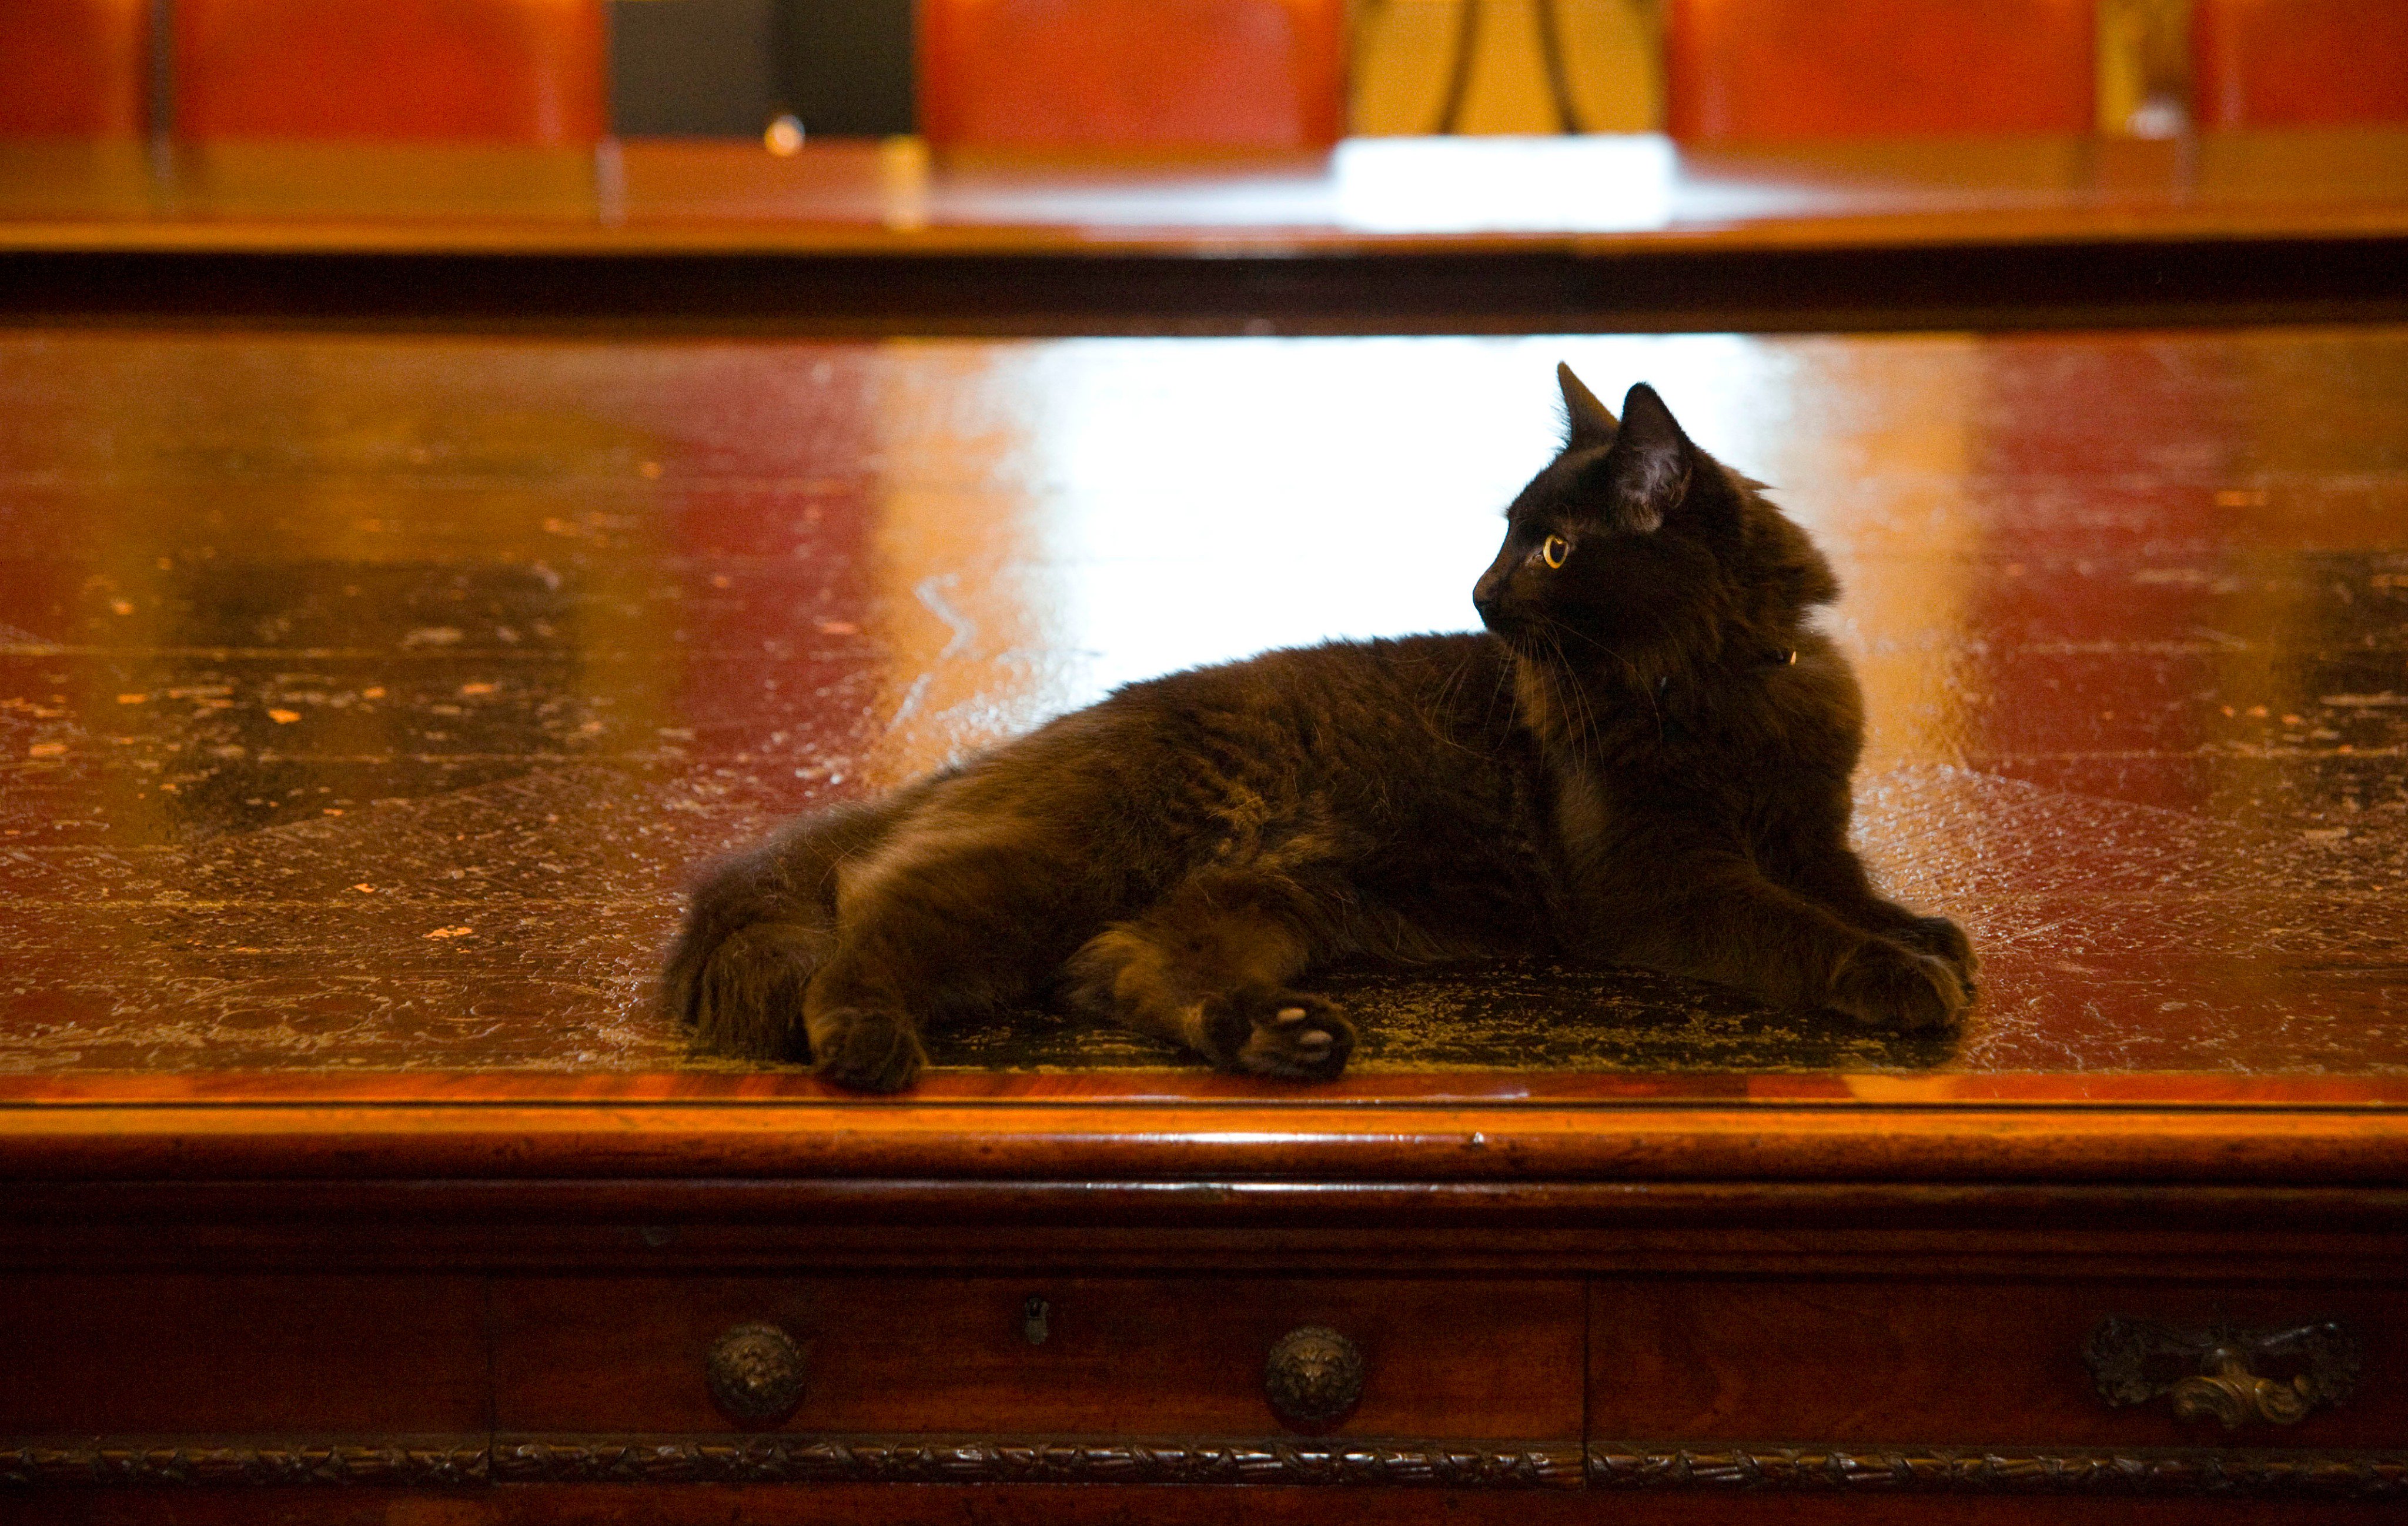 A black cat lounging across a large wooden table.